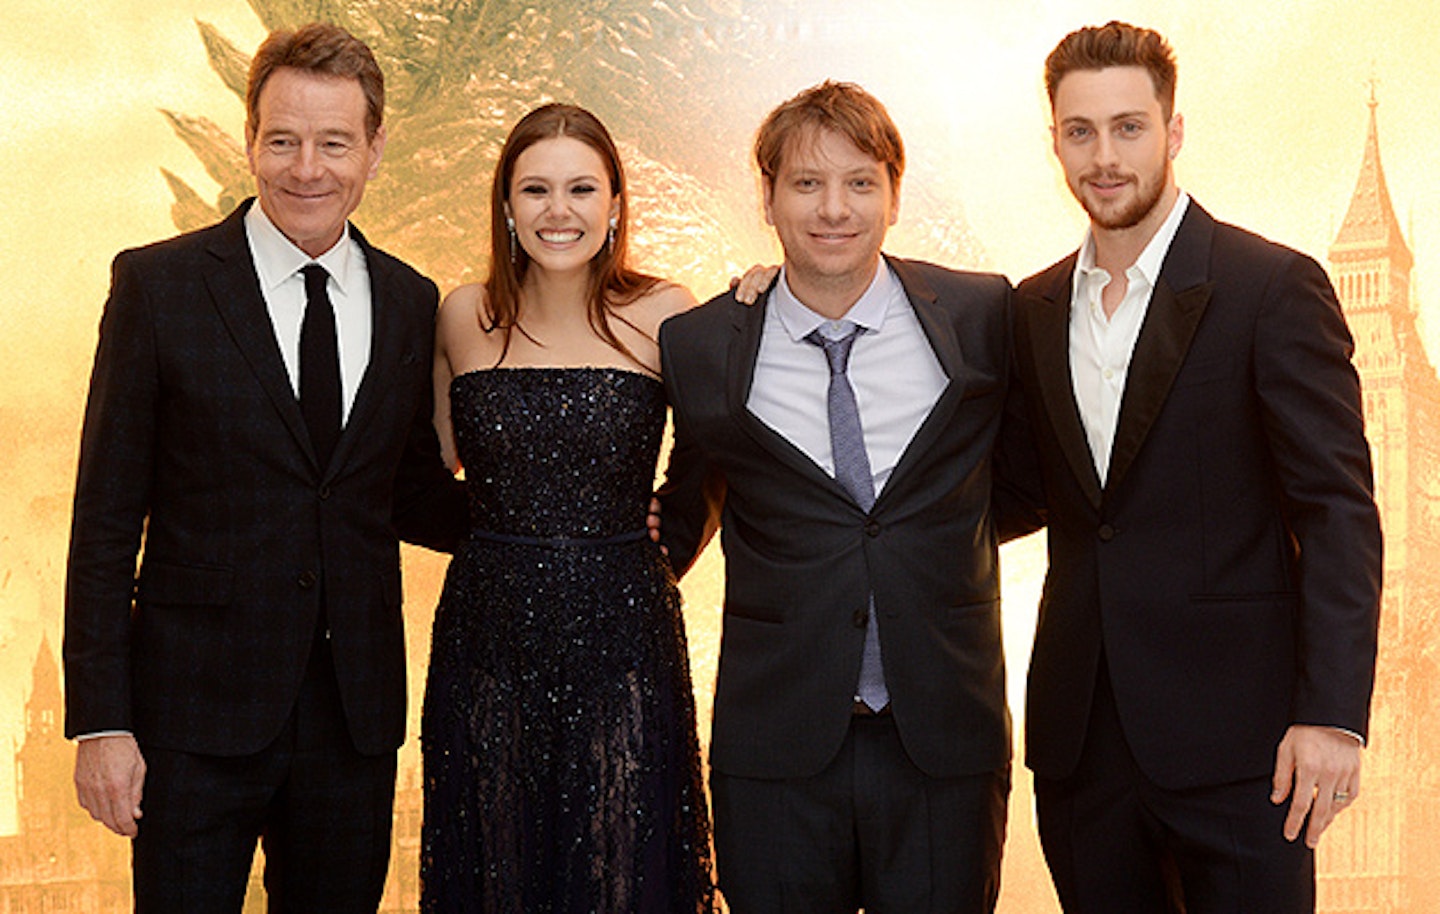 Bryan Cranston, Elizabeth Olsen and Aaron Taylor Johnson attend the European premiere of Godzilla at the Odeon Leicester Square